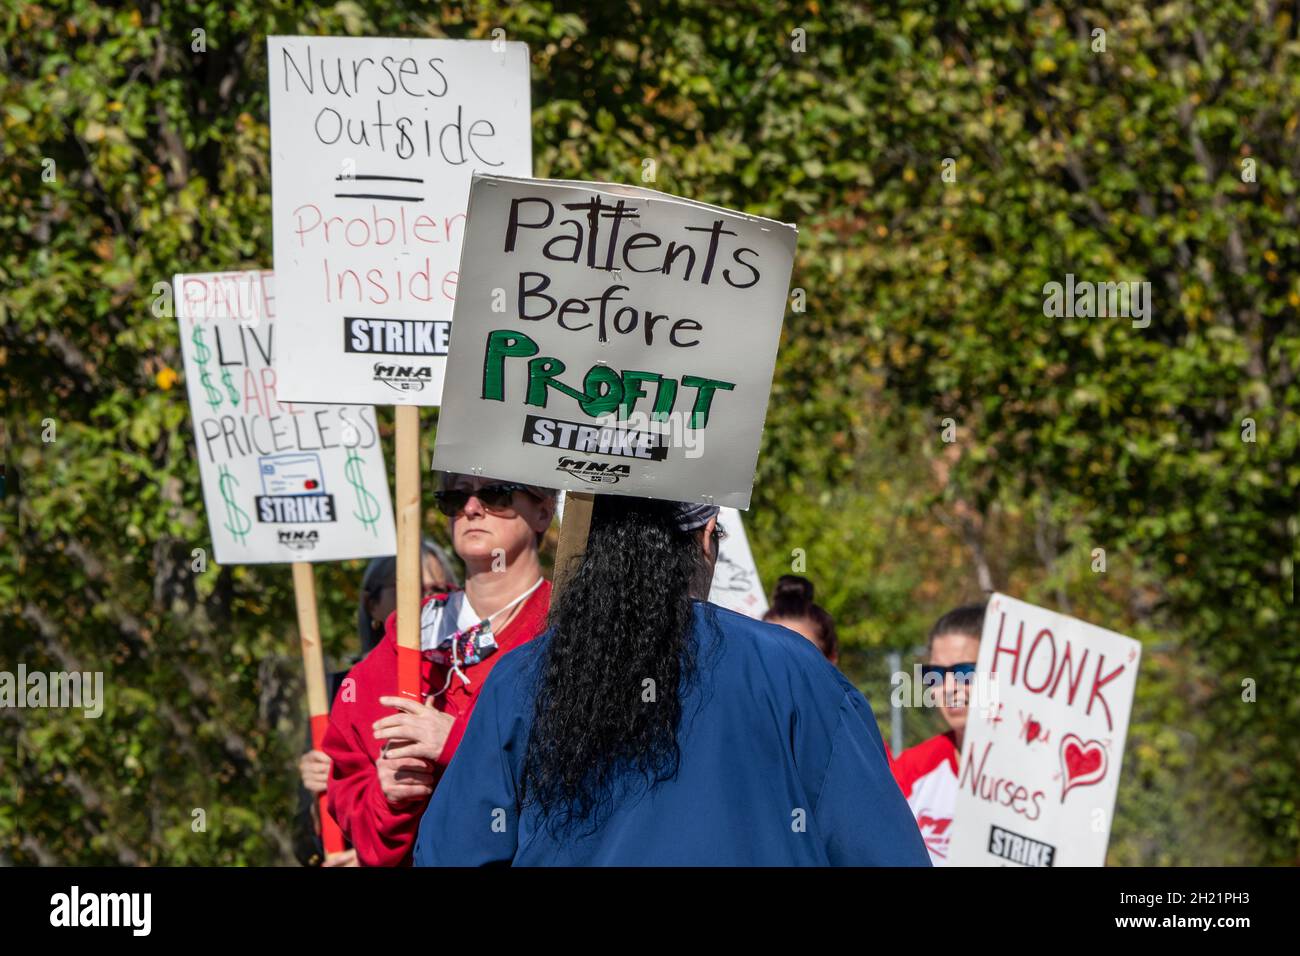 Plymouth, Minnesota. October 17, 2021.  Alllina WestHealth hospital closes the emergency room and urgent care while the nurses strike to seek a new co Stock Photo